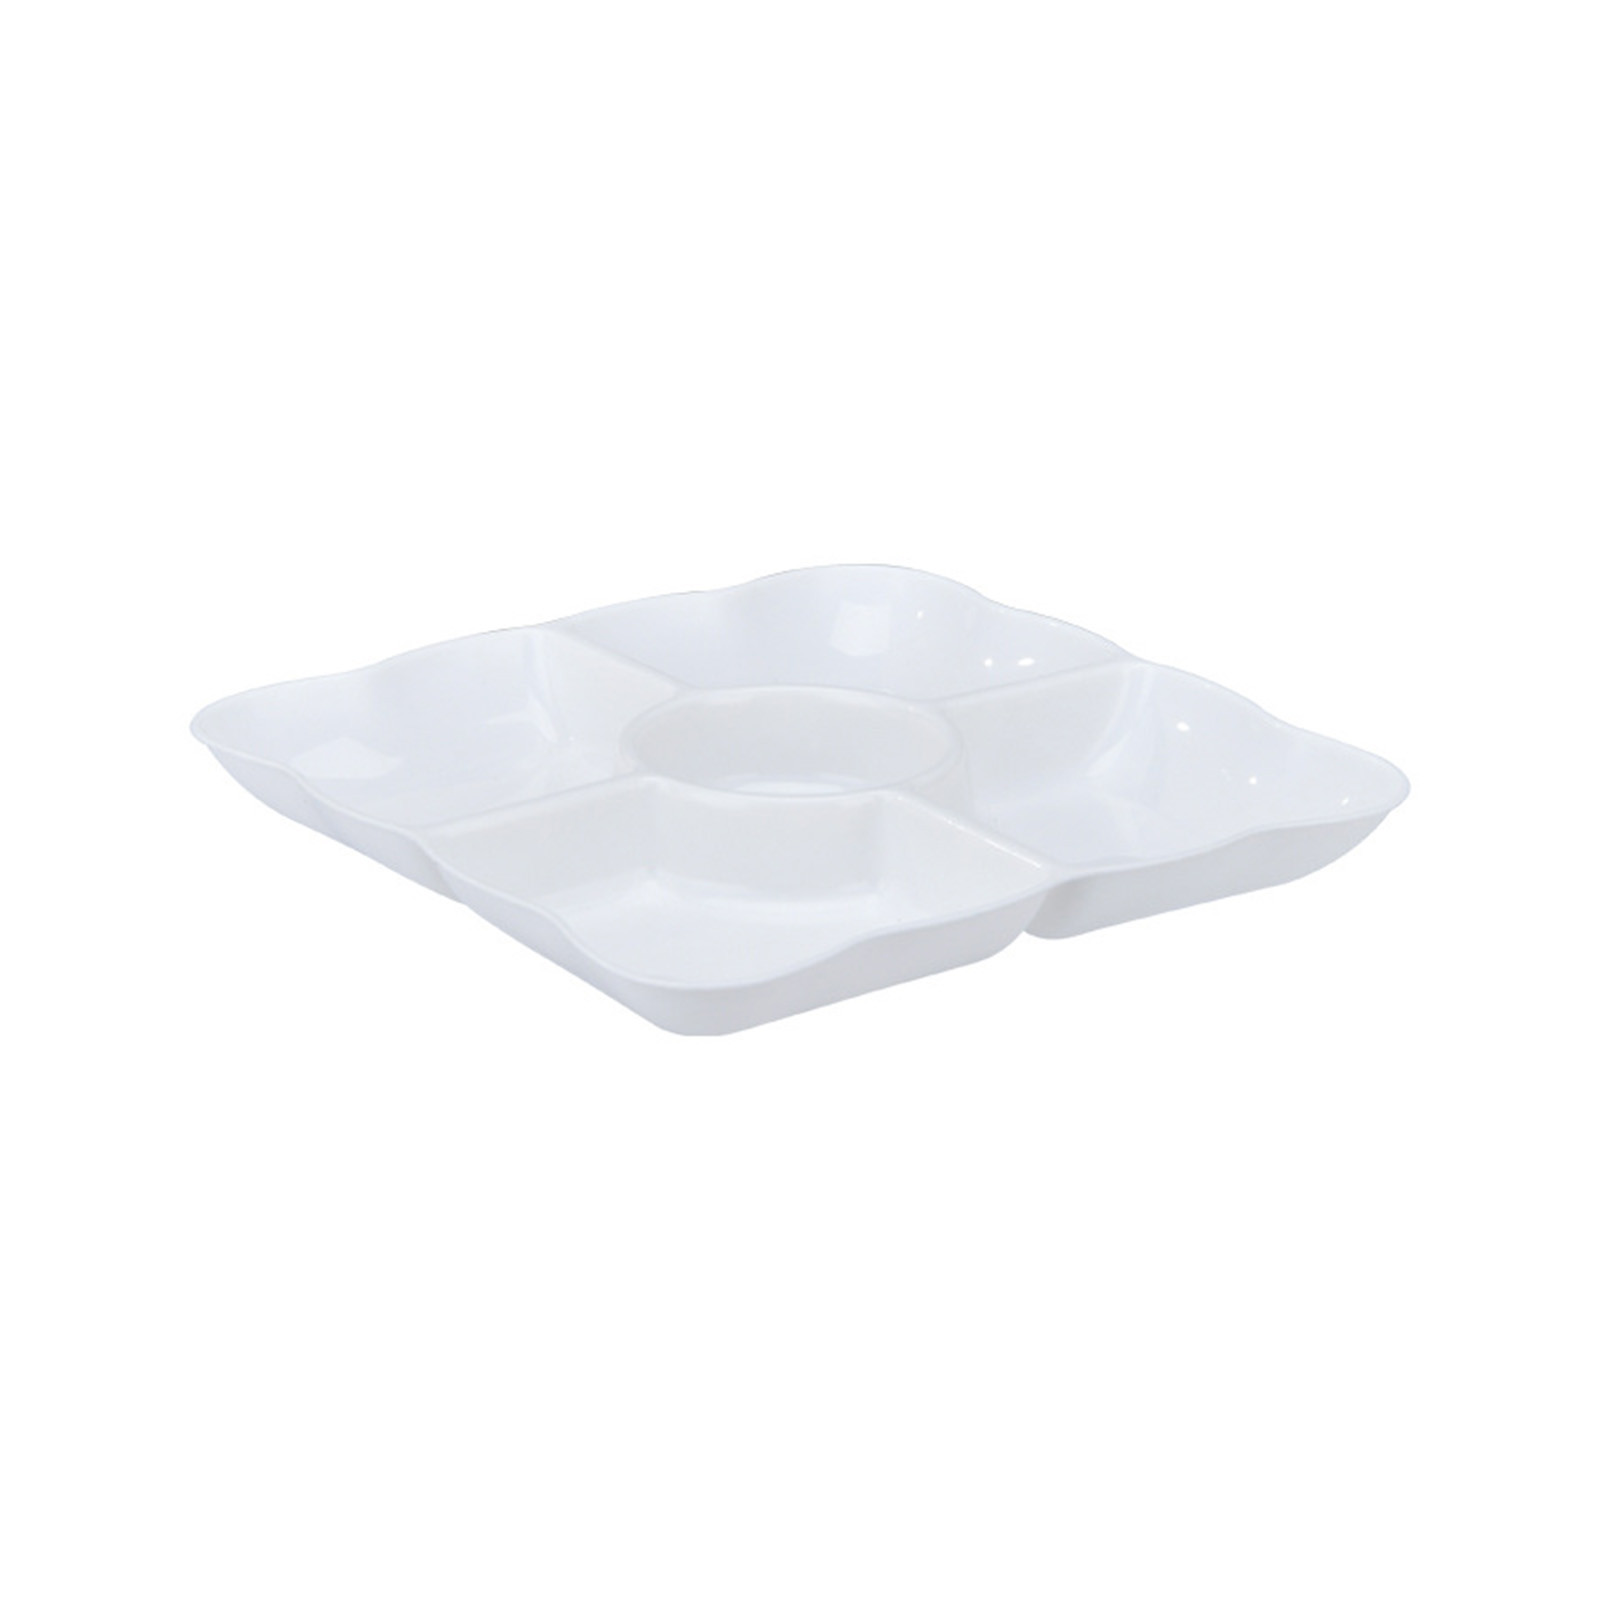 Matoen Divided Serving Dish, Appetizer Snack Tray Platter for Fruit, Veggies, Candy, Chip and Dip, Relish Tray for Christmas Thanksgiving Party, 5 Compartment, White - image 3 of 6